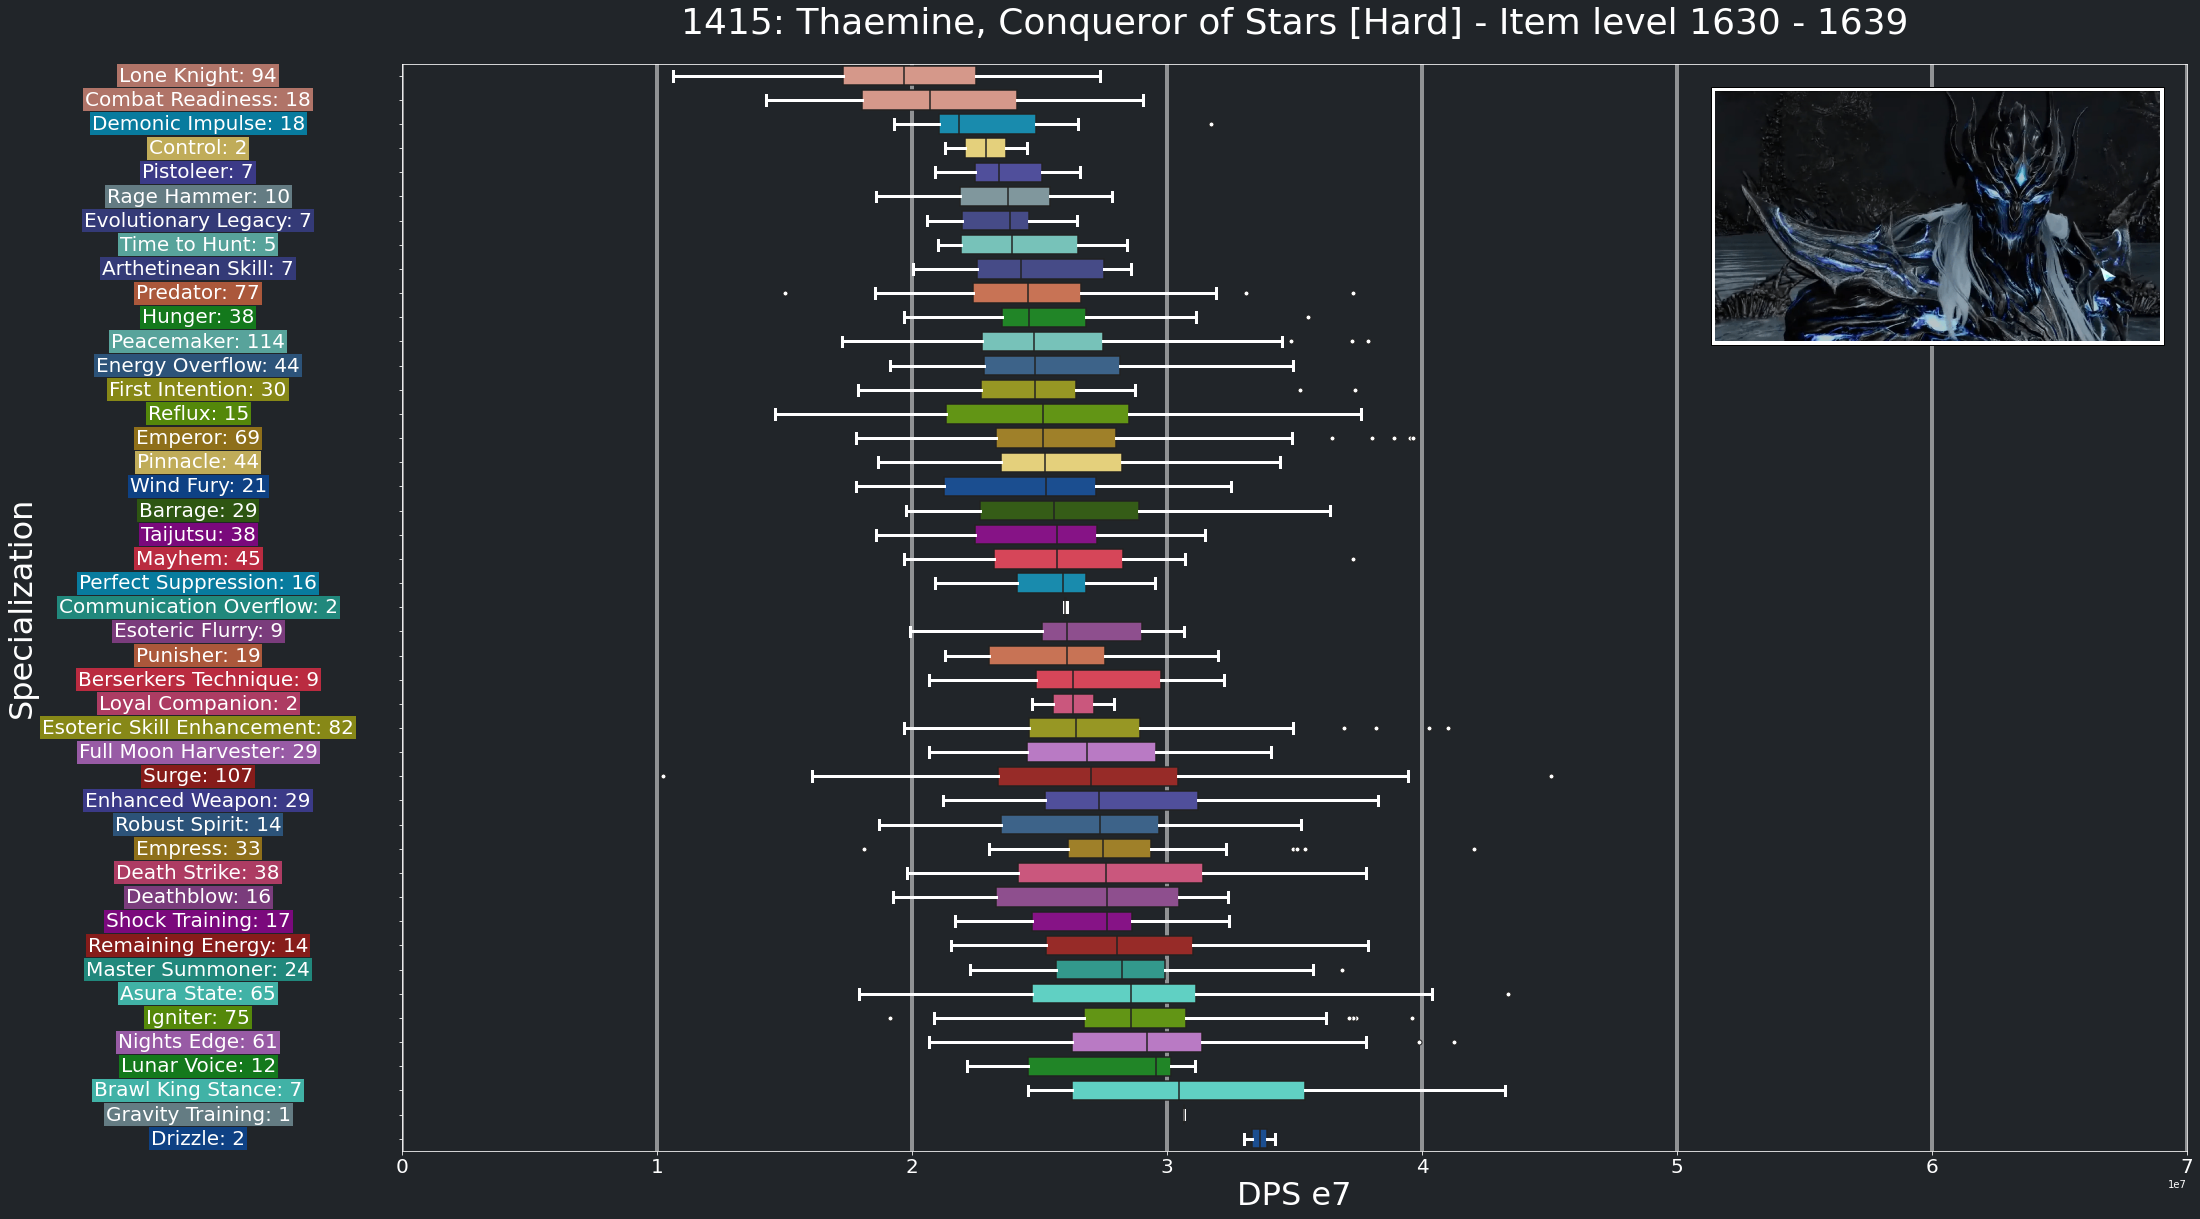 DPS_Thaemine,ConquerorofStarsHard_1630to1640_Median.png